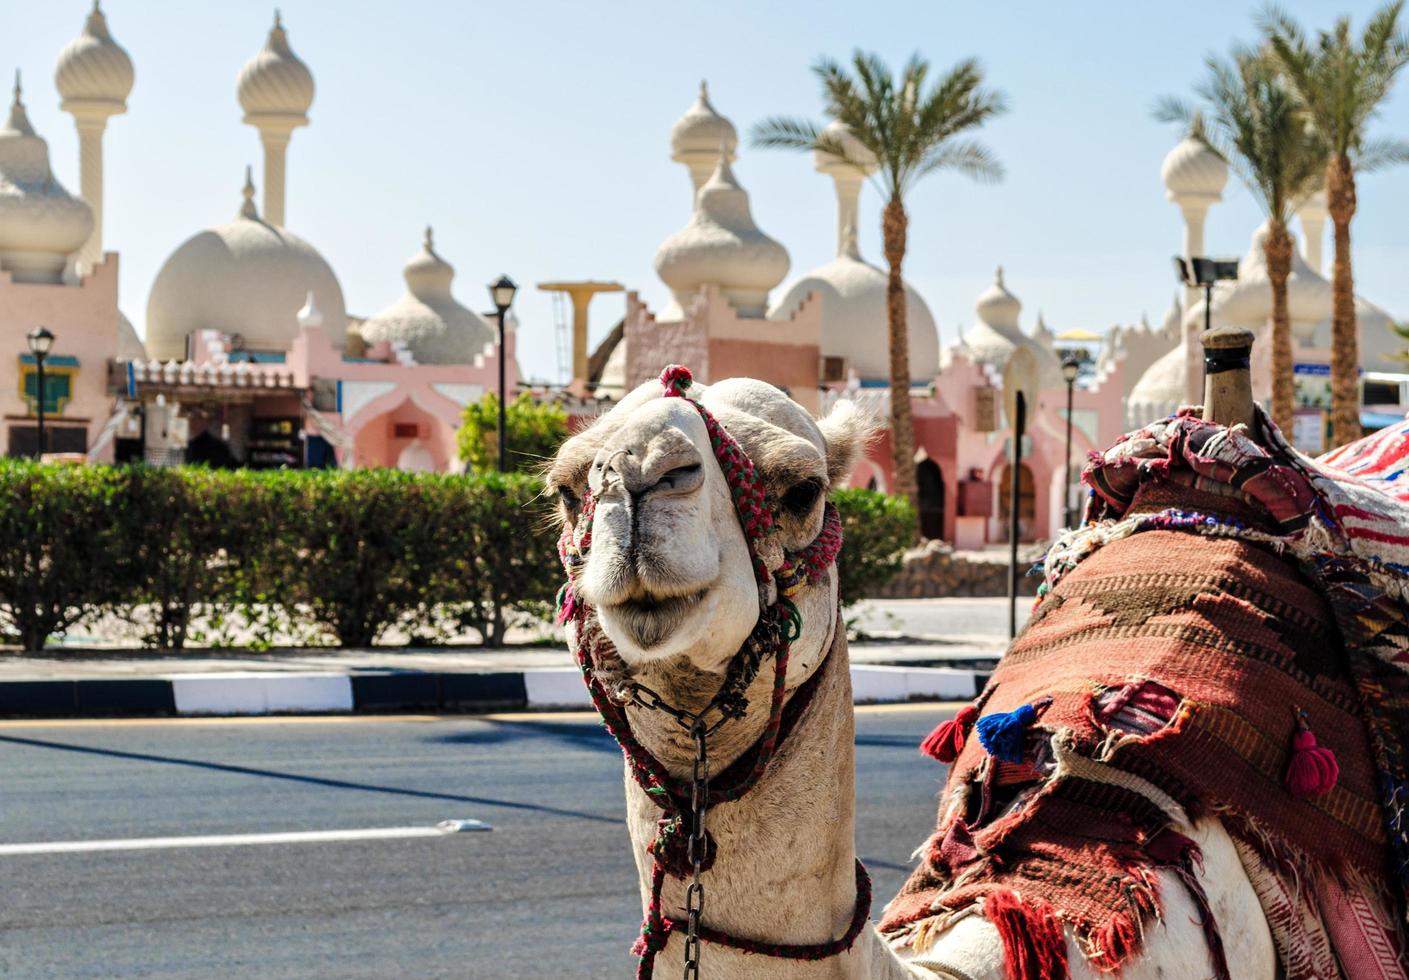 A riding camel in a bright blanket on the sunny street of Sharm El Sheikh photo